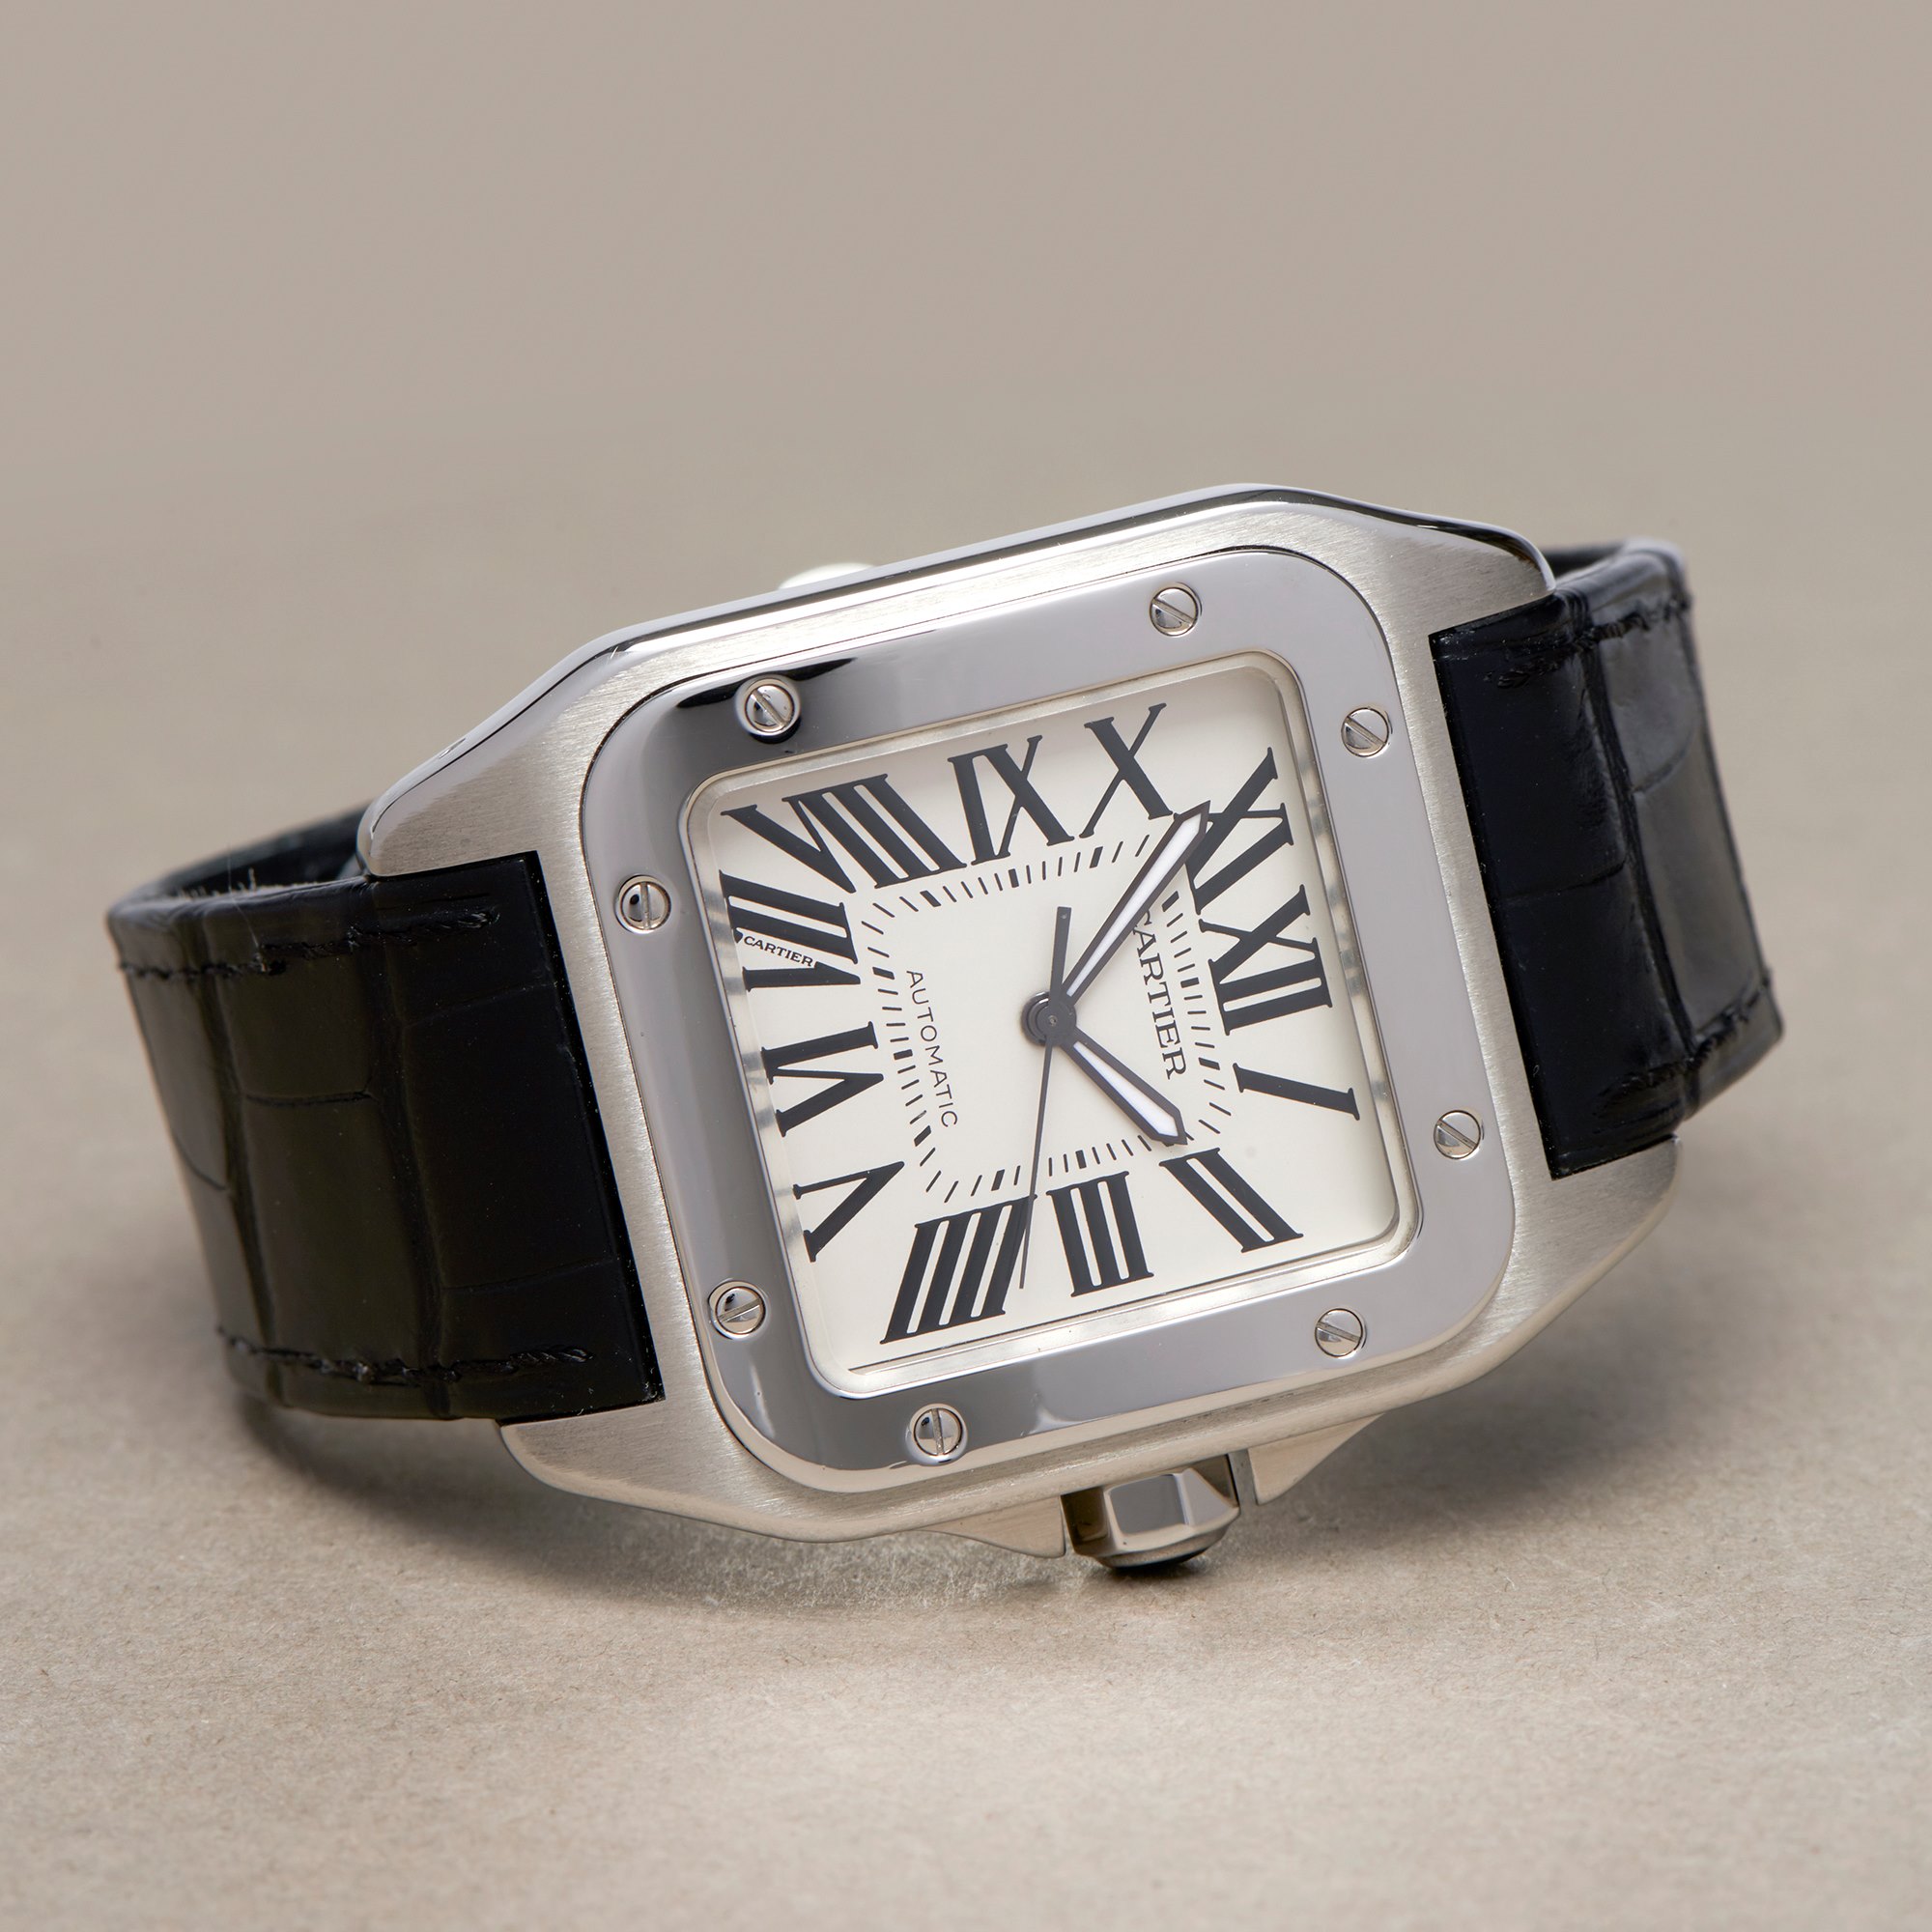 Cartier Santos 100 2656 or W20073X8 Men Stainless Steel Watch - Image 6 of 10